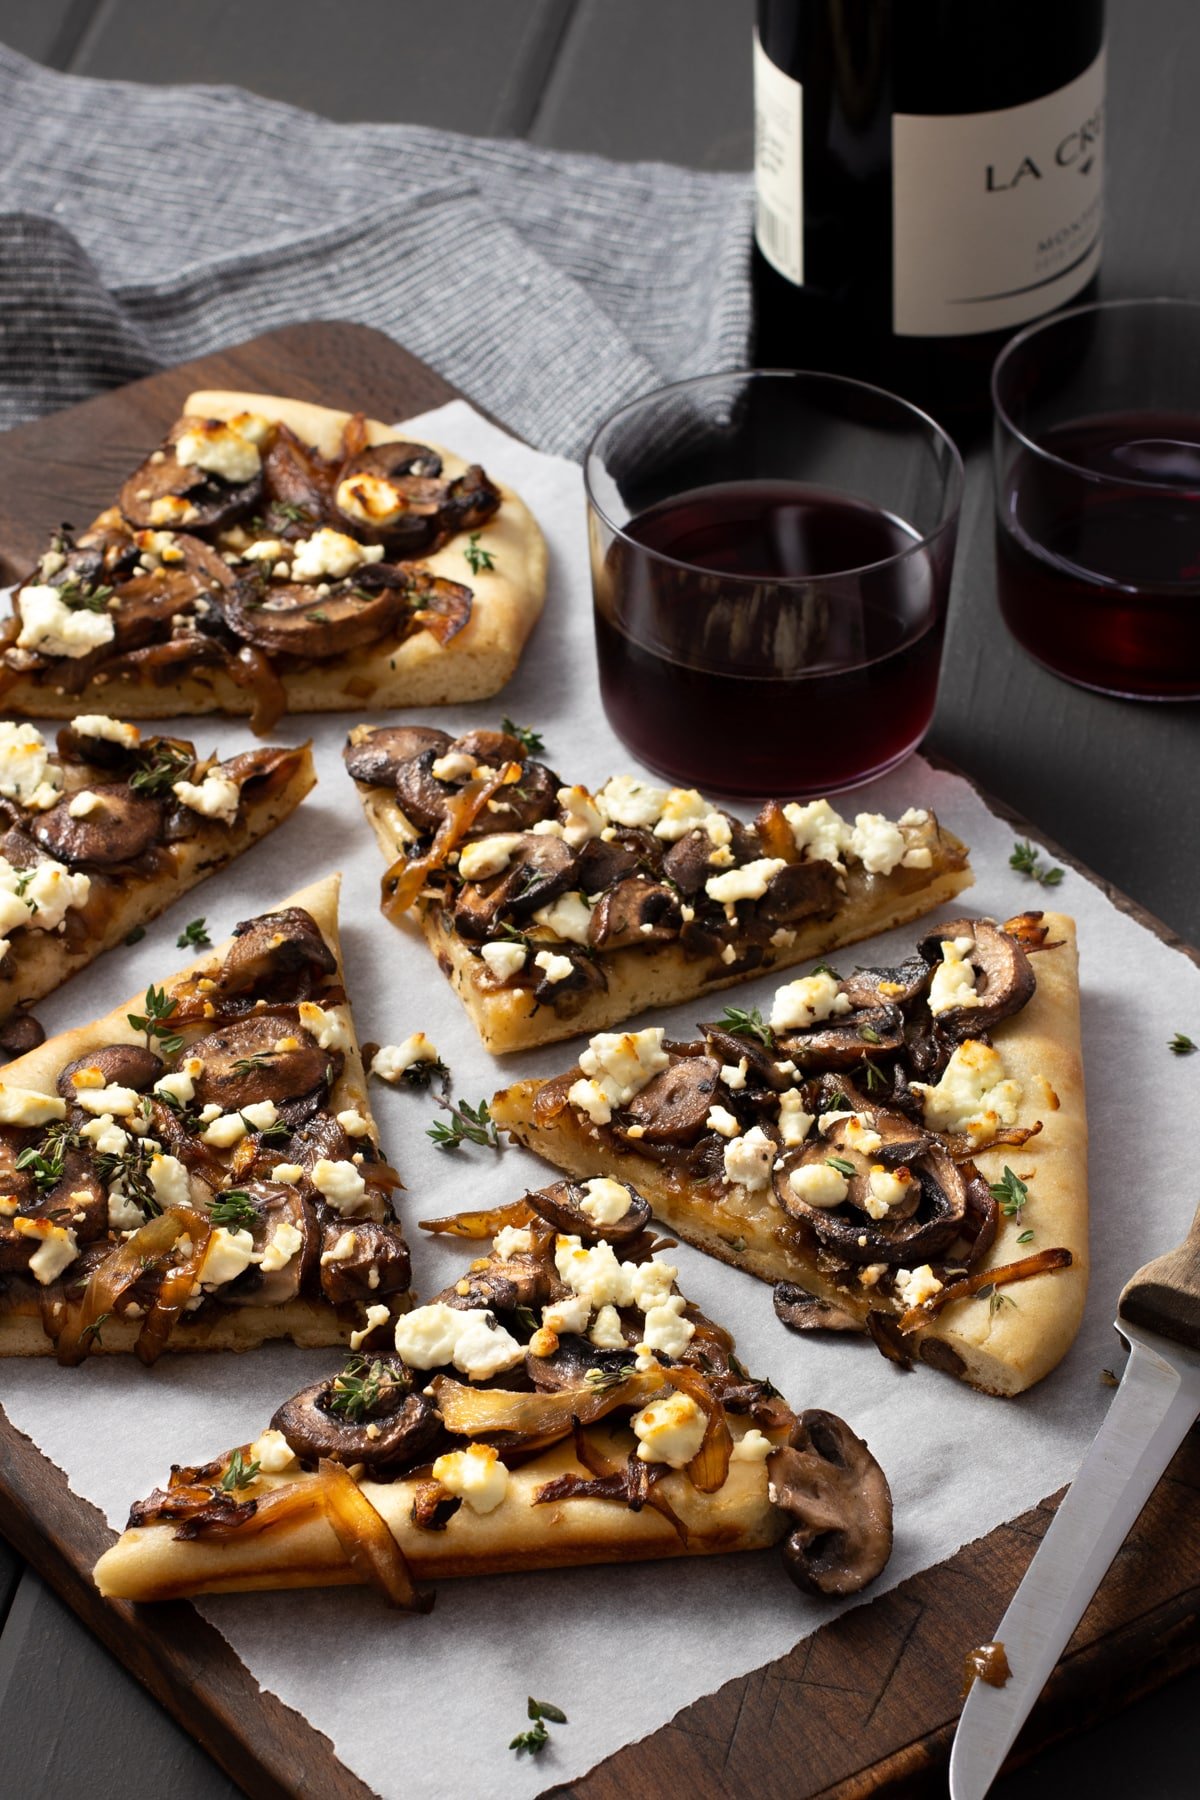 Mushroom, Caramelized Onion, and Goat Cheese Pizza Flatbread